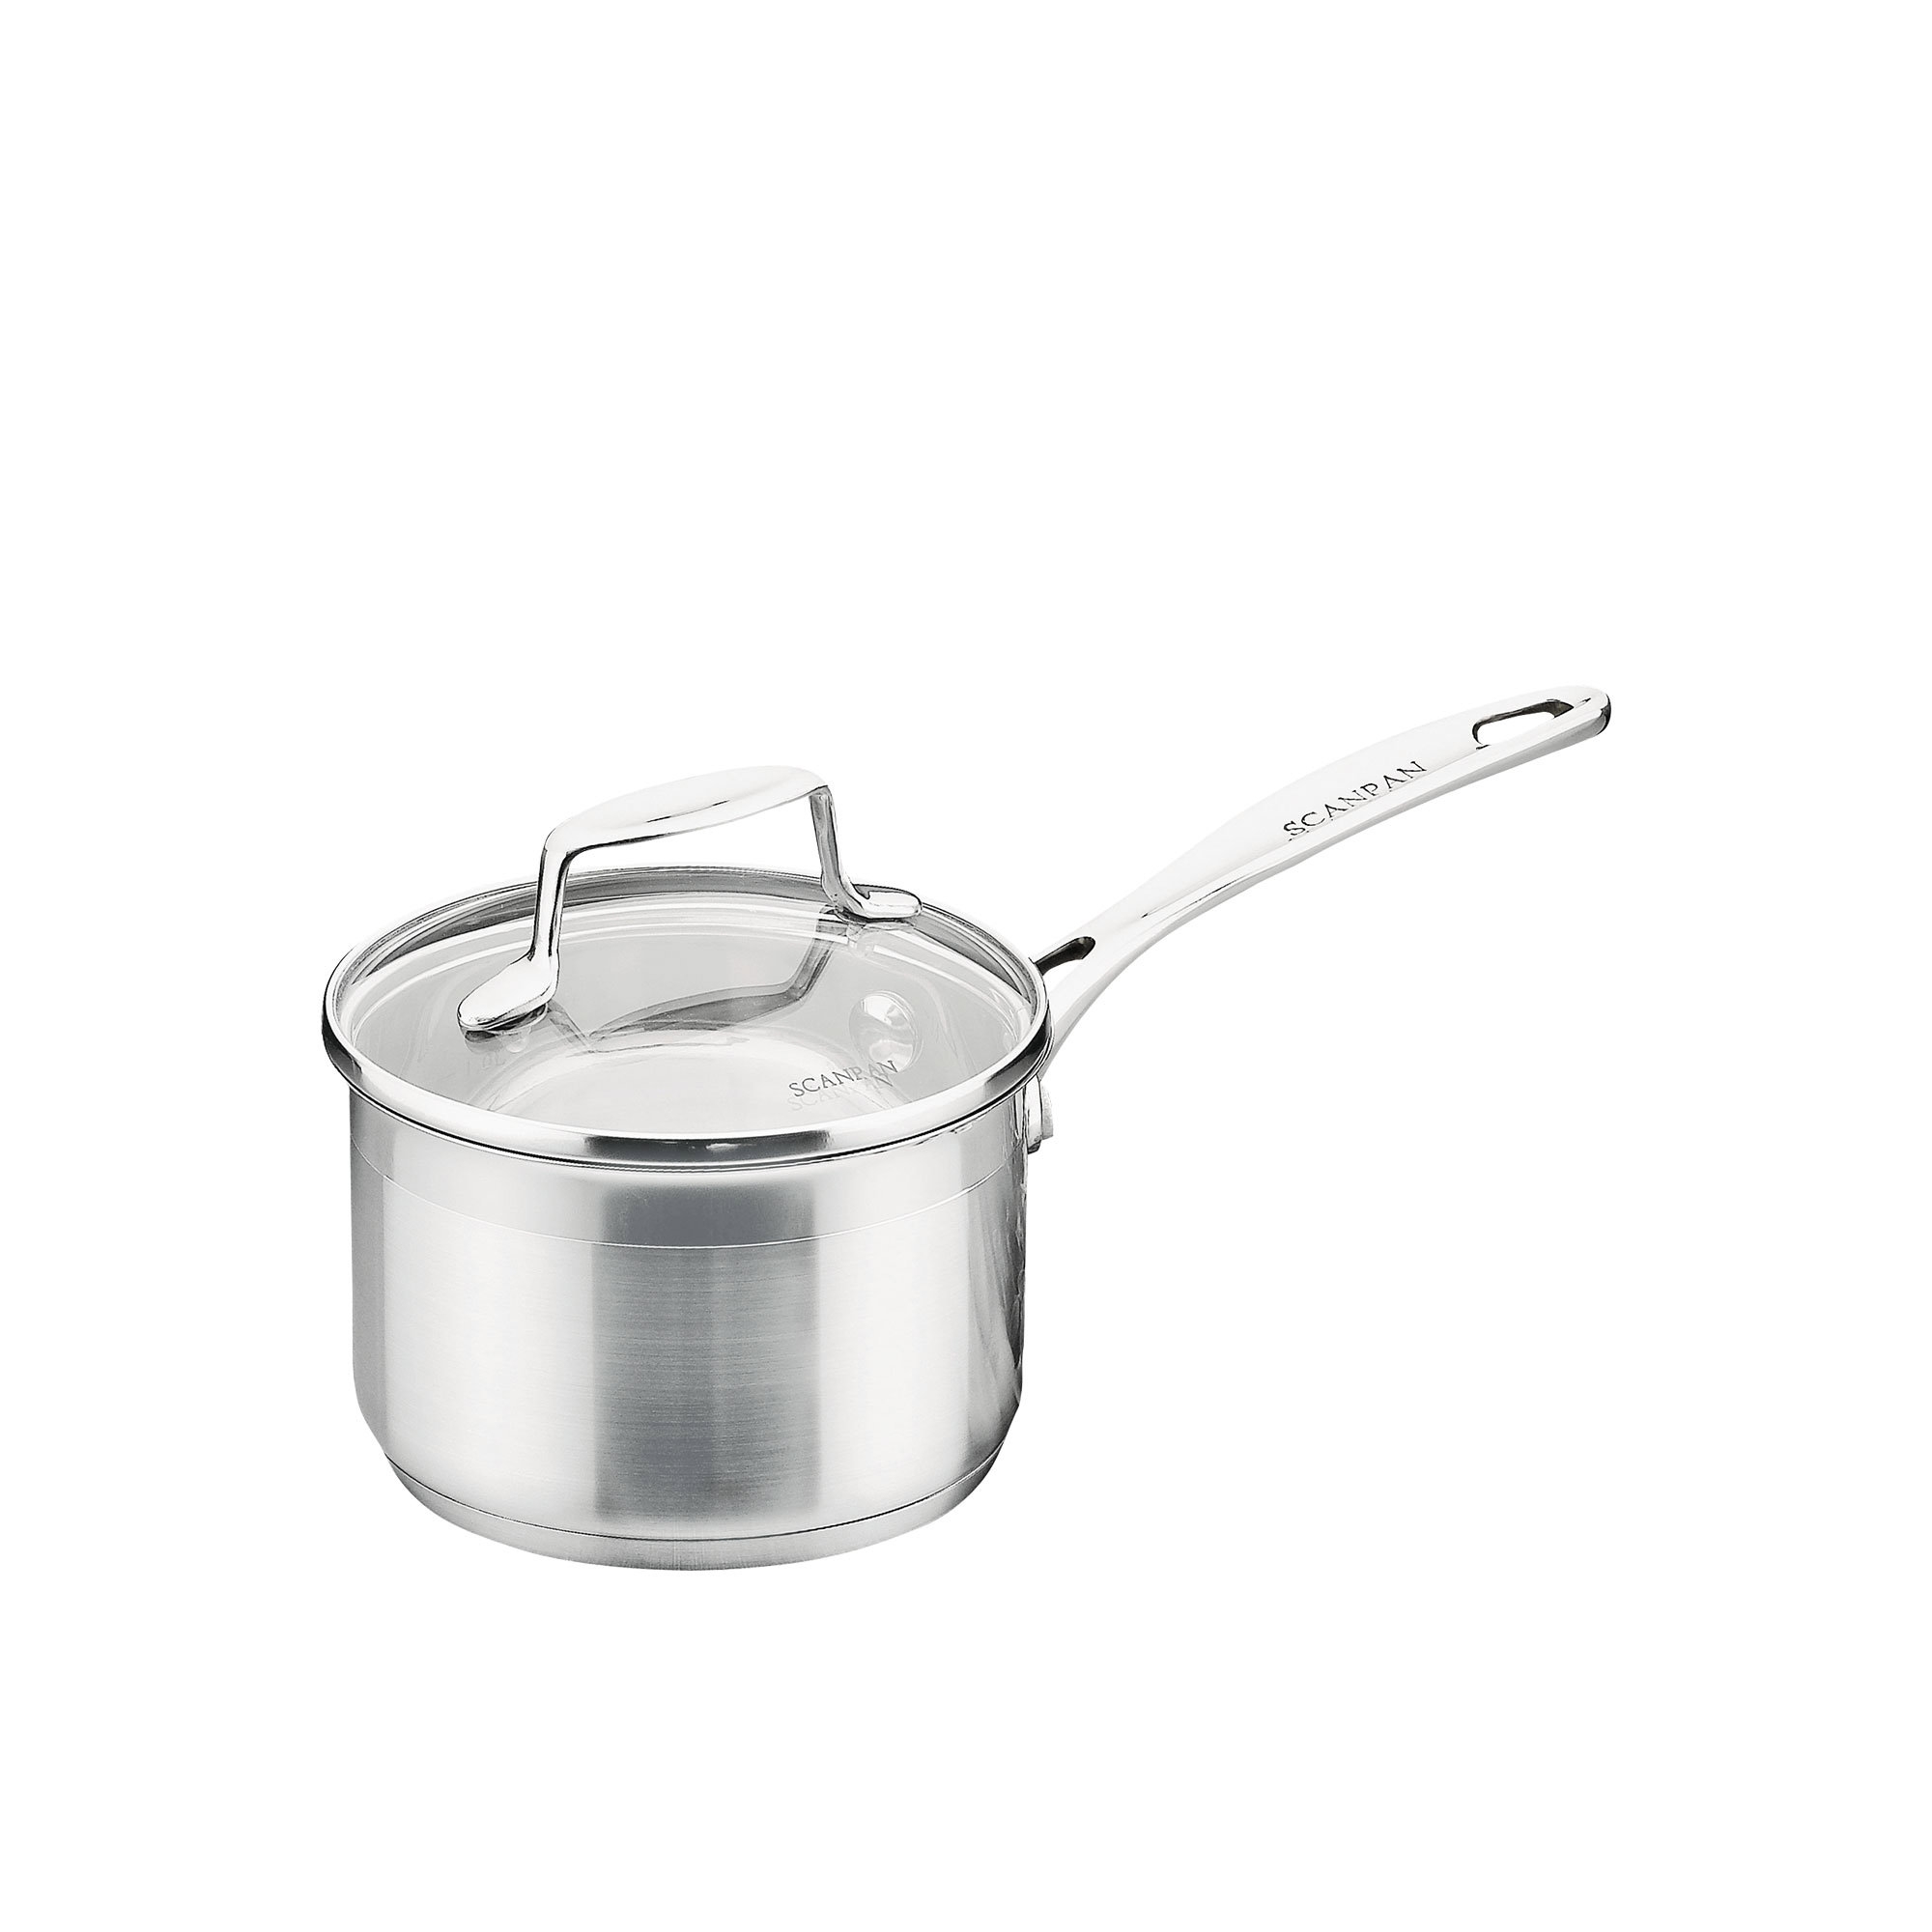 Scanpan Impact Stainless Steel Saucepan with Lid 18cm - 2.5L Image 1